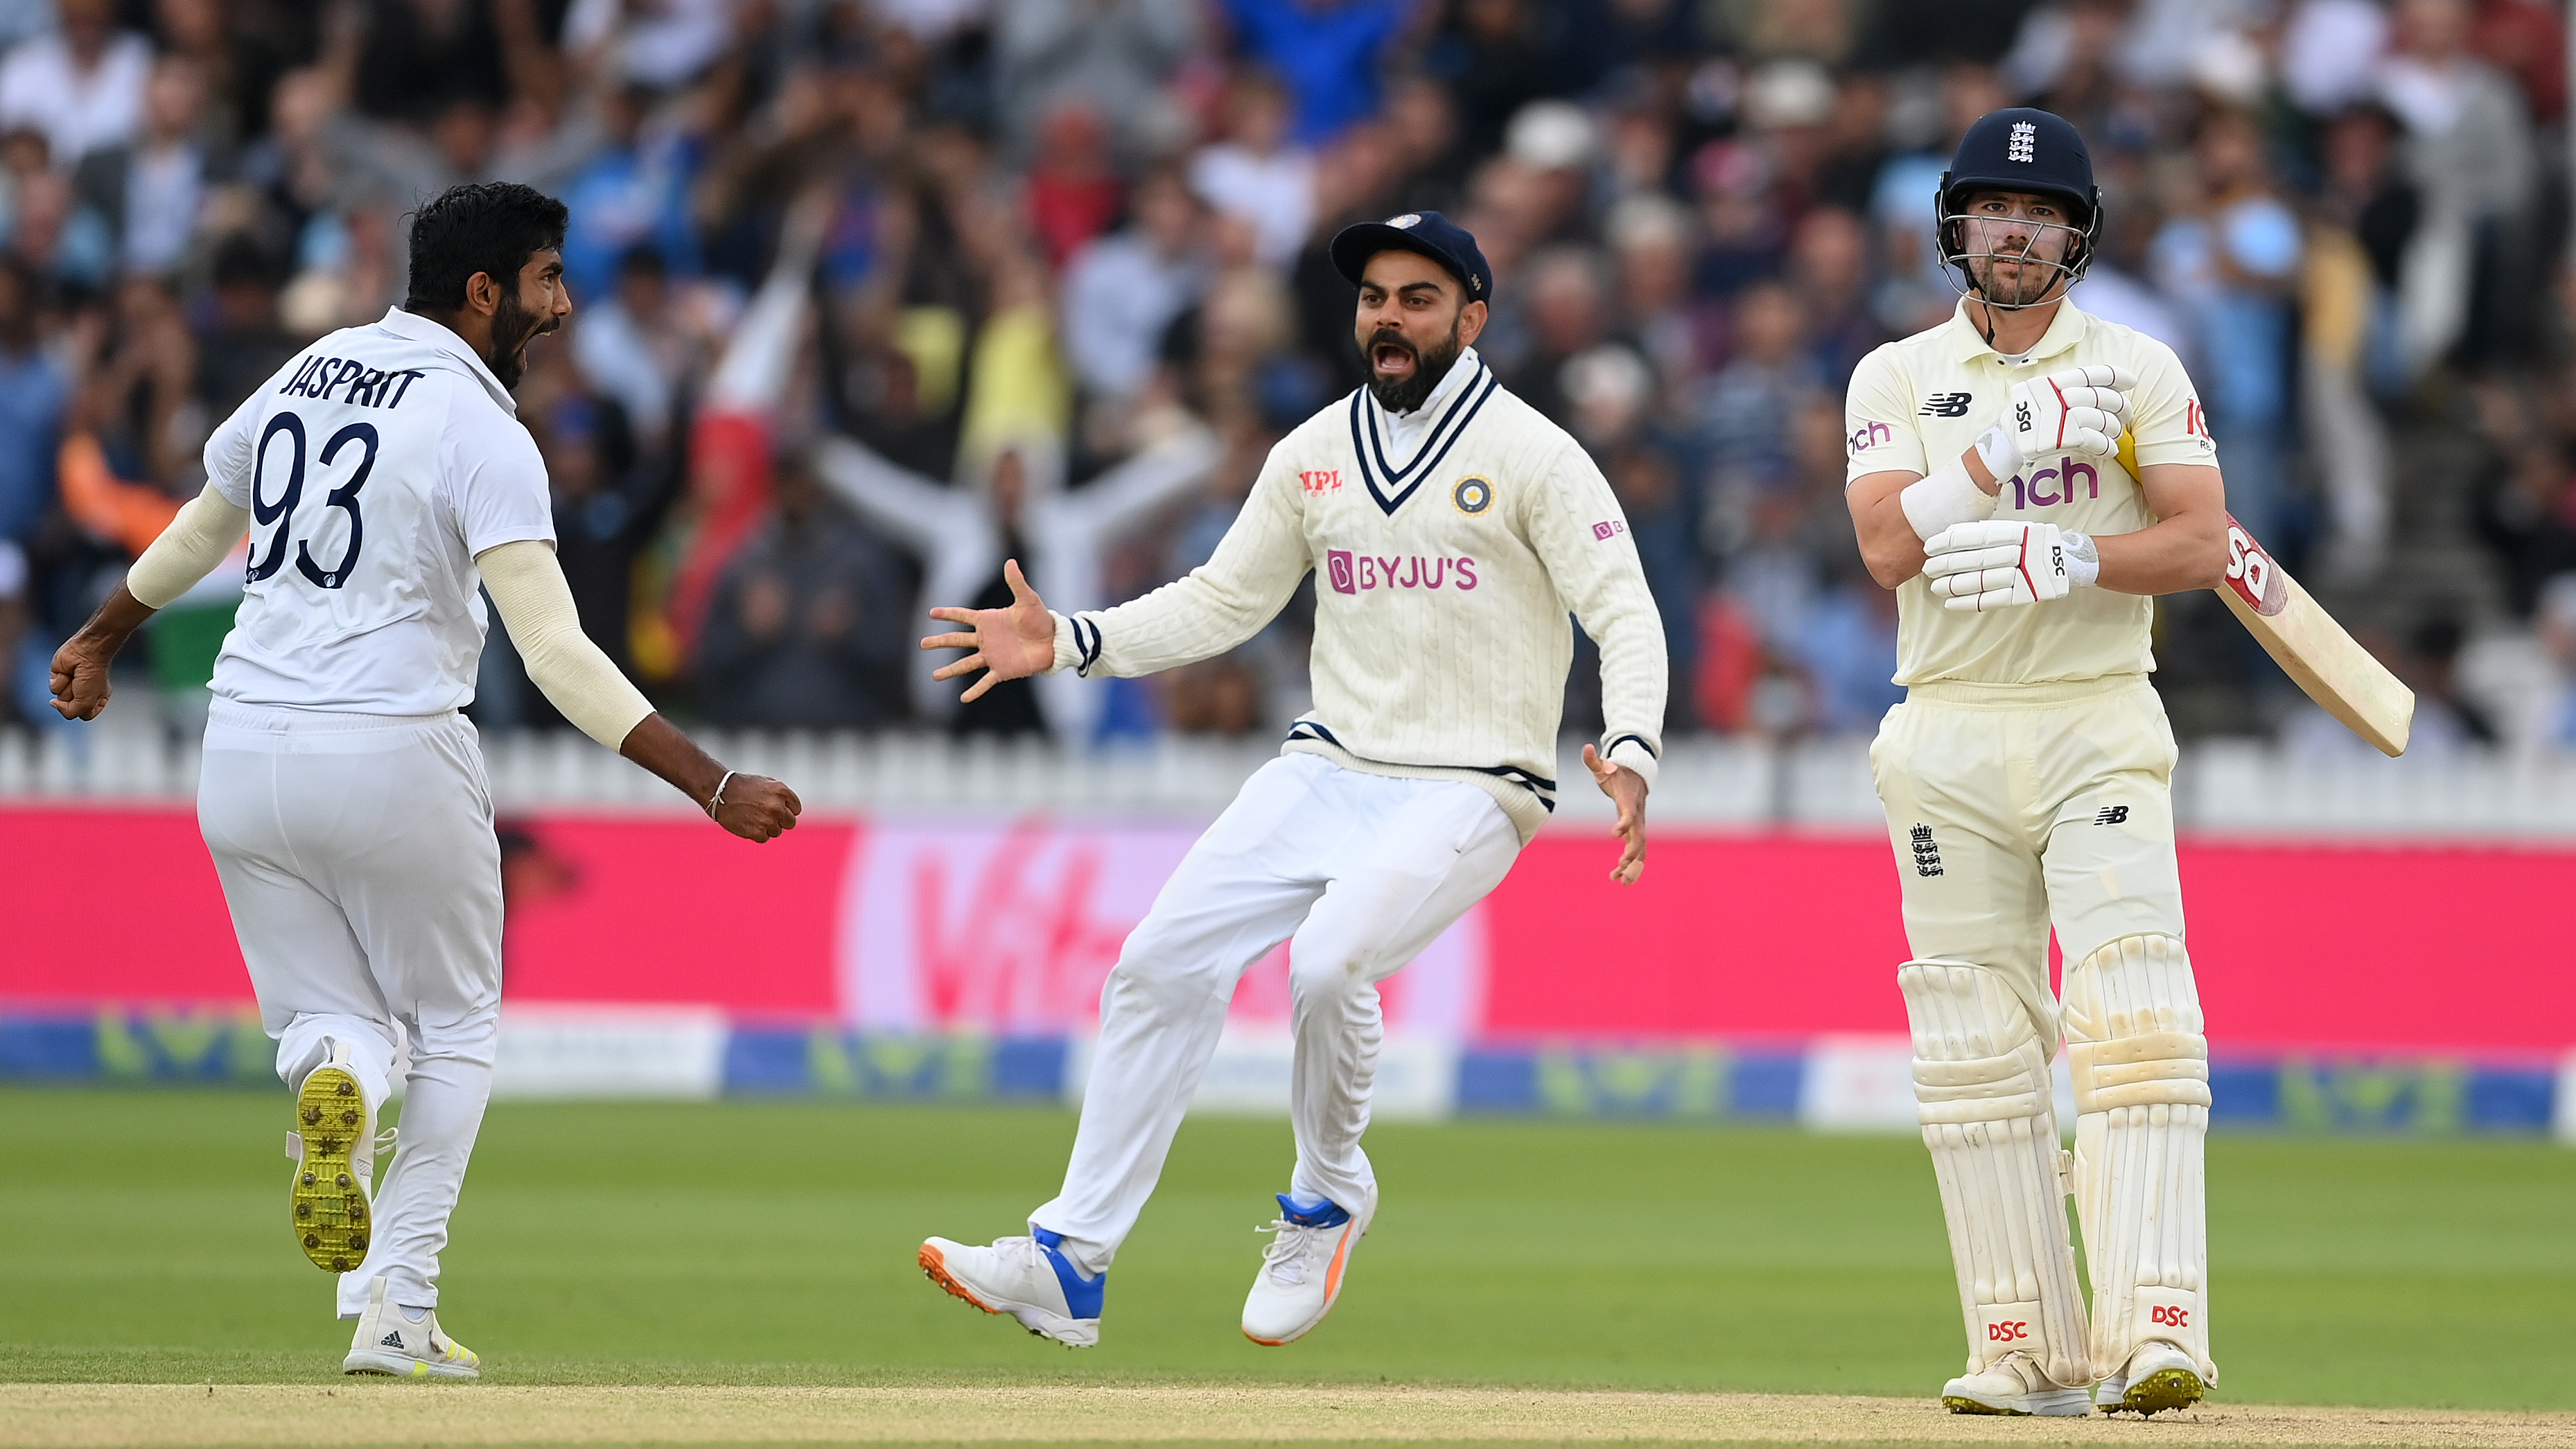 ENG vs IND | Lord's Day 5 Talking Points - England’s poor tactics, India's wagging tail and the relentless fast-bowling intensity